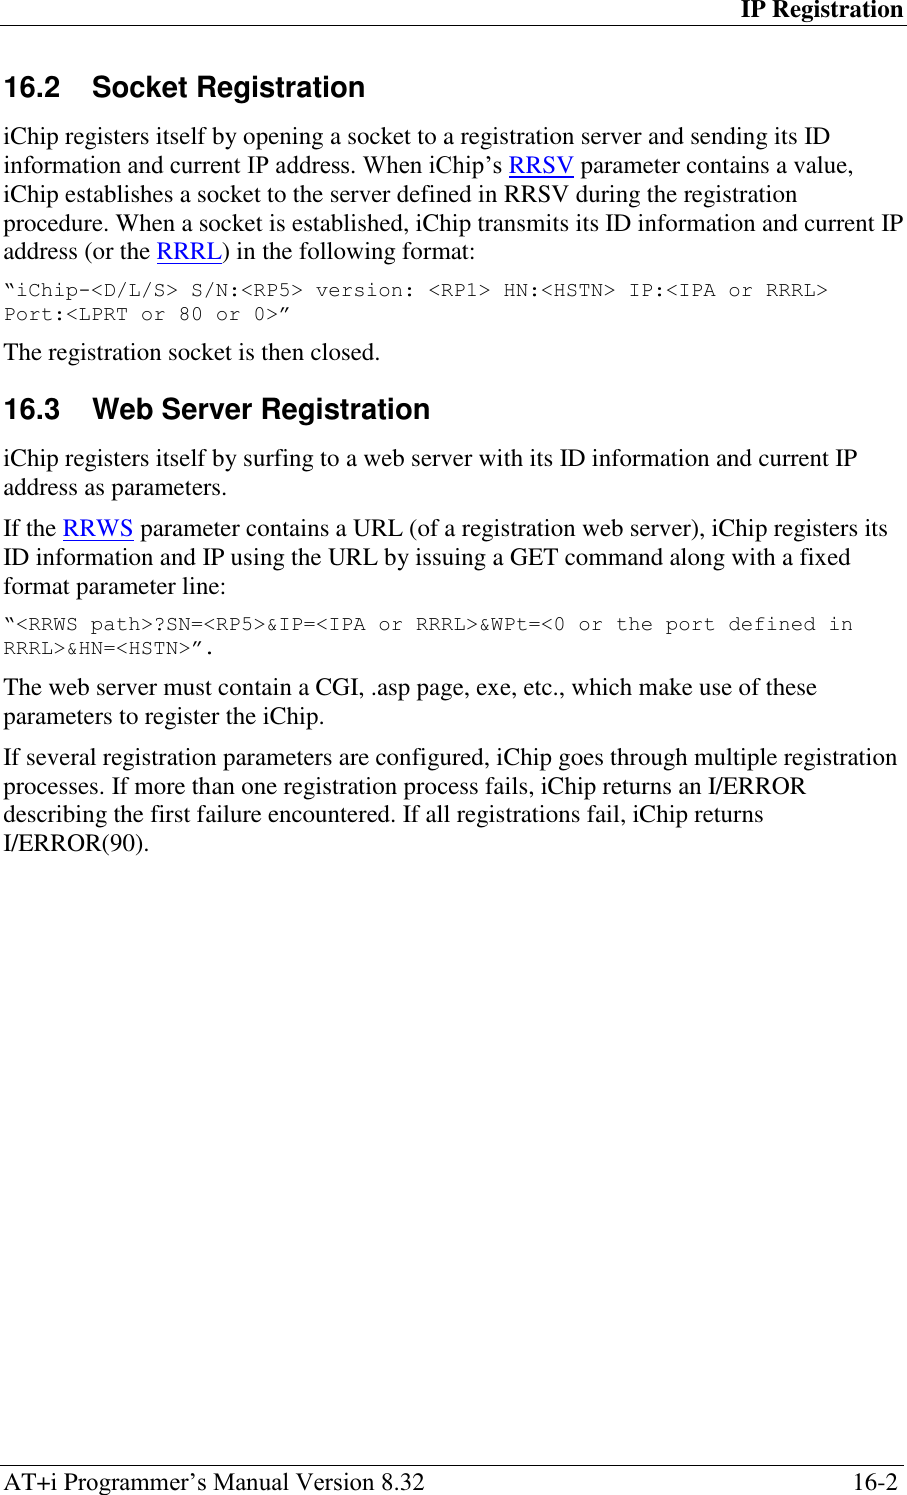 IP Registration AT+i Programmer‘s Manual Version 8.32  16-2 16.2  Socket Registration iChip registers itself by opening a socket to a registration server and sending its ID information and current IP address. When iChip‘s RRSV parameter contains a value, iChip establishes a socket to the server defined in RRSV during the registration procedure. When a socket is established, iChip transmits its ID information and current IP address (or the RRRL) in the following format: “iChip-&lt;D/L/S&gt; S/N:&lt;RP5&gt; version: &lt;RP1&gt; HN:&lt;HSTN&gt; IP:&lt;IPA or RRRL&gt; Port:&lt;LPRT or 80 or 0&gt;” The registration socket is then closed. 16.3  Web Server Registration iChip registers itself by surfing to a web server with its ID information and current IP address as parameters. If the RRWS parameter contains a URL (of a registration web server), iChip registers its ID information and IP using the URL by issuing a GET command along with a fixed format parameter line: “&lt;RRWS path&gt;?SN=&lt;RP5&gt;&amp;IP=&lt;IPA or RRRL&gt;&amp;WPt=&lt;0 or the port defined in RRRL&gt;&amp;HN=&lt;HSTN&gt;”. The web server must contain a CGI, .asp page, exe, etc., which make use of these parameters to register the iChip. If several registration parameters are configured, iChip goes through multiple registration processes. If more than one registration process fails, iChip returns an I/ERROR describing the first failure encountered. If all registrations fail, iChip returns I/ERROR(90).   